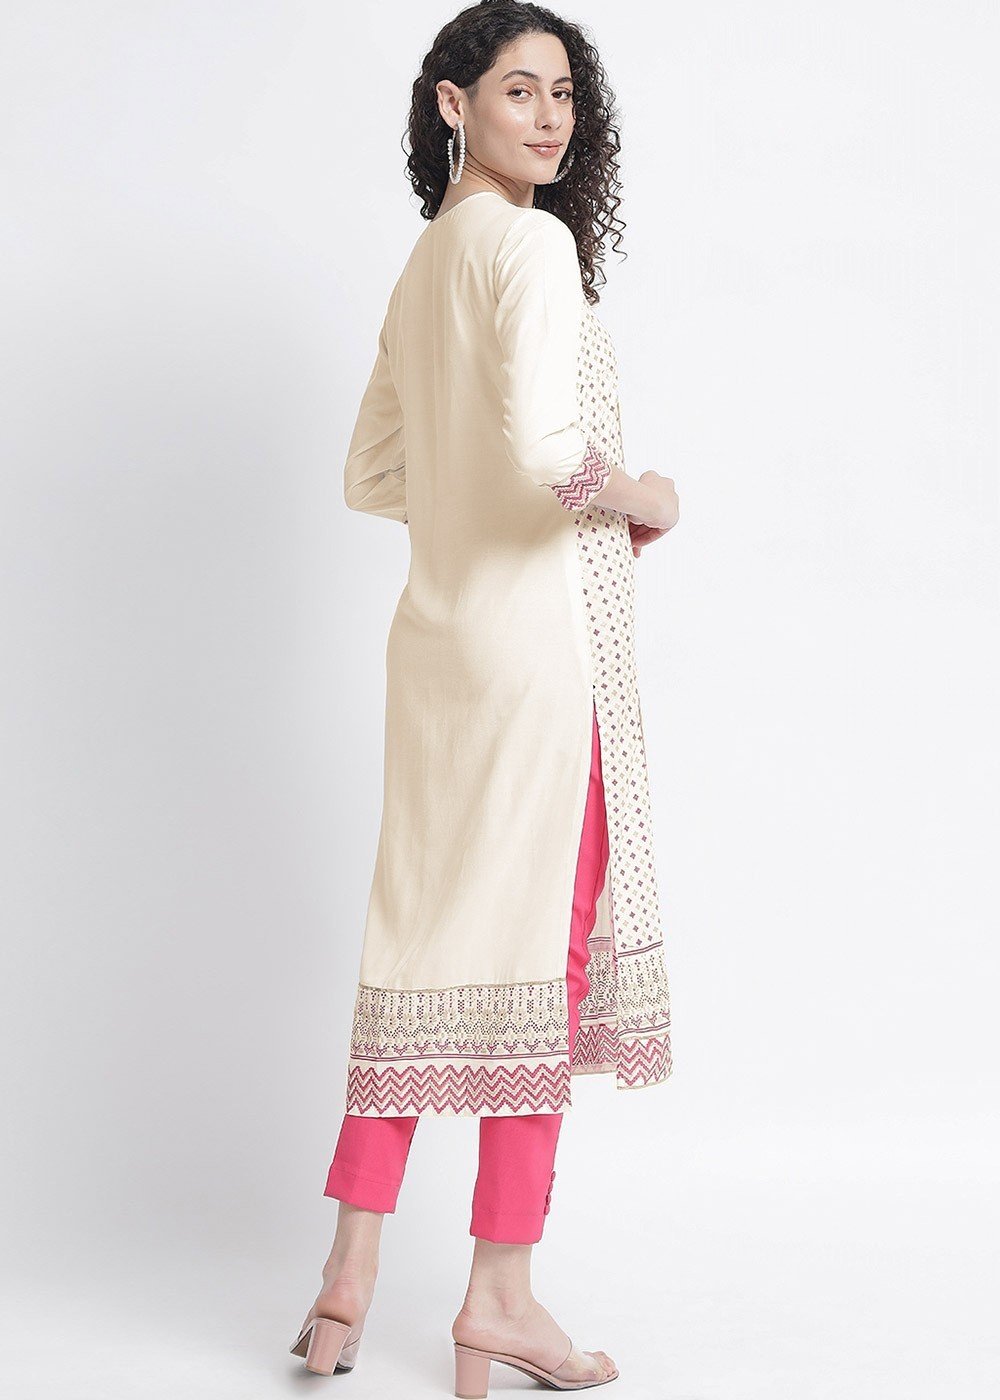 Off White Printed Readymade Kurti For Casual Wear Latest 793KR07